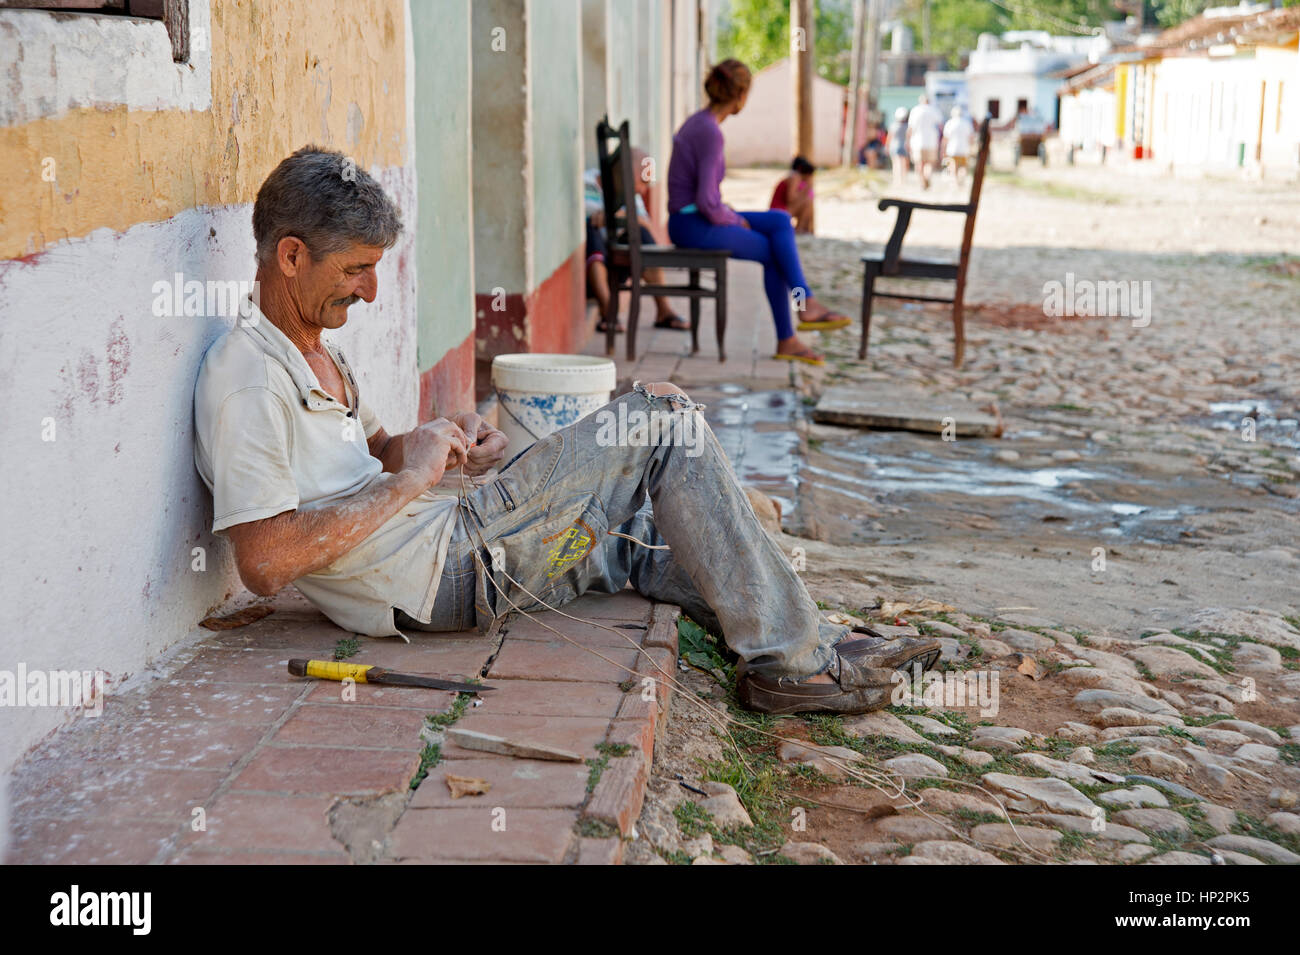 A Cuban man sitting on the pavement in the shade of his house working on some rope in Trinidad Cuba Stock Photo